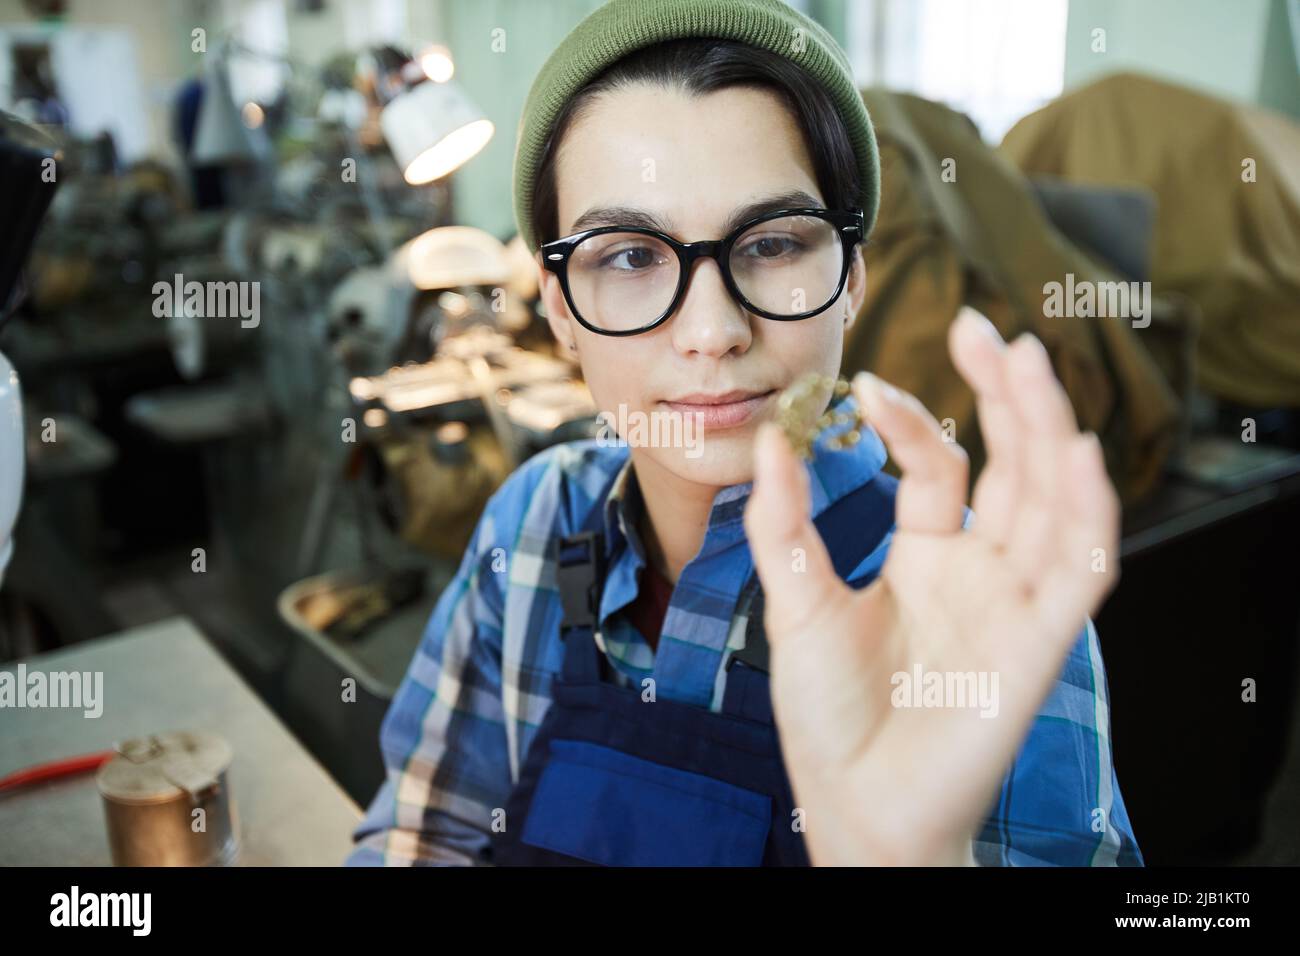 Serious thoughtful smart lady engineer in glasses examining small detail while working at watch production plant Stock Photo